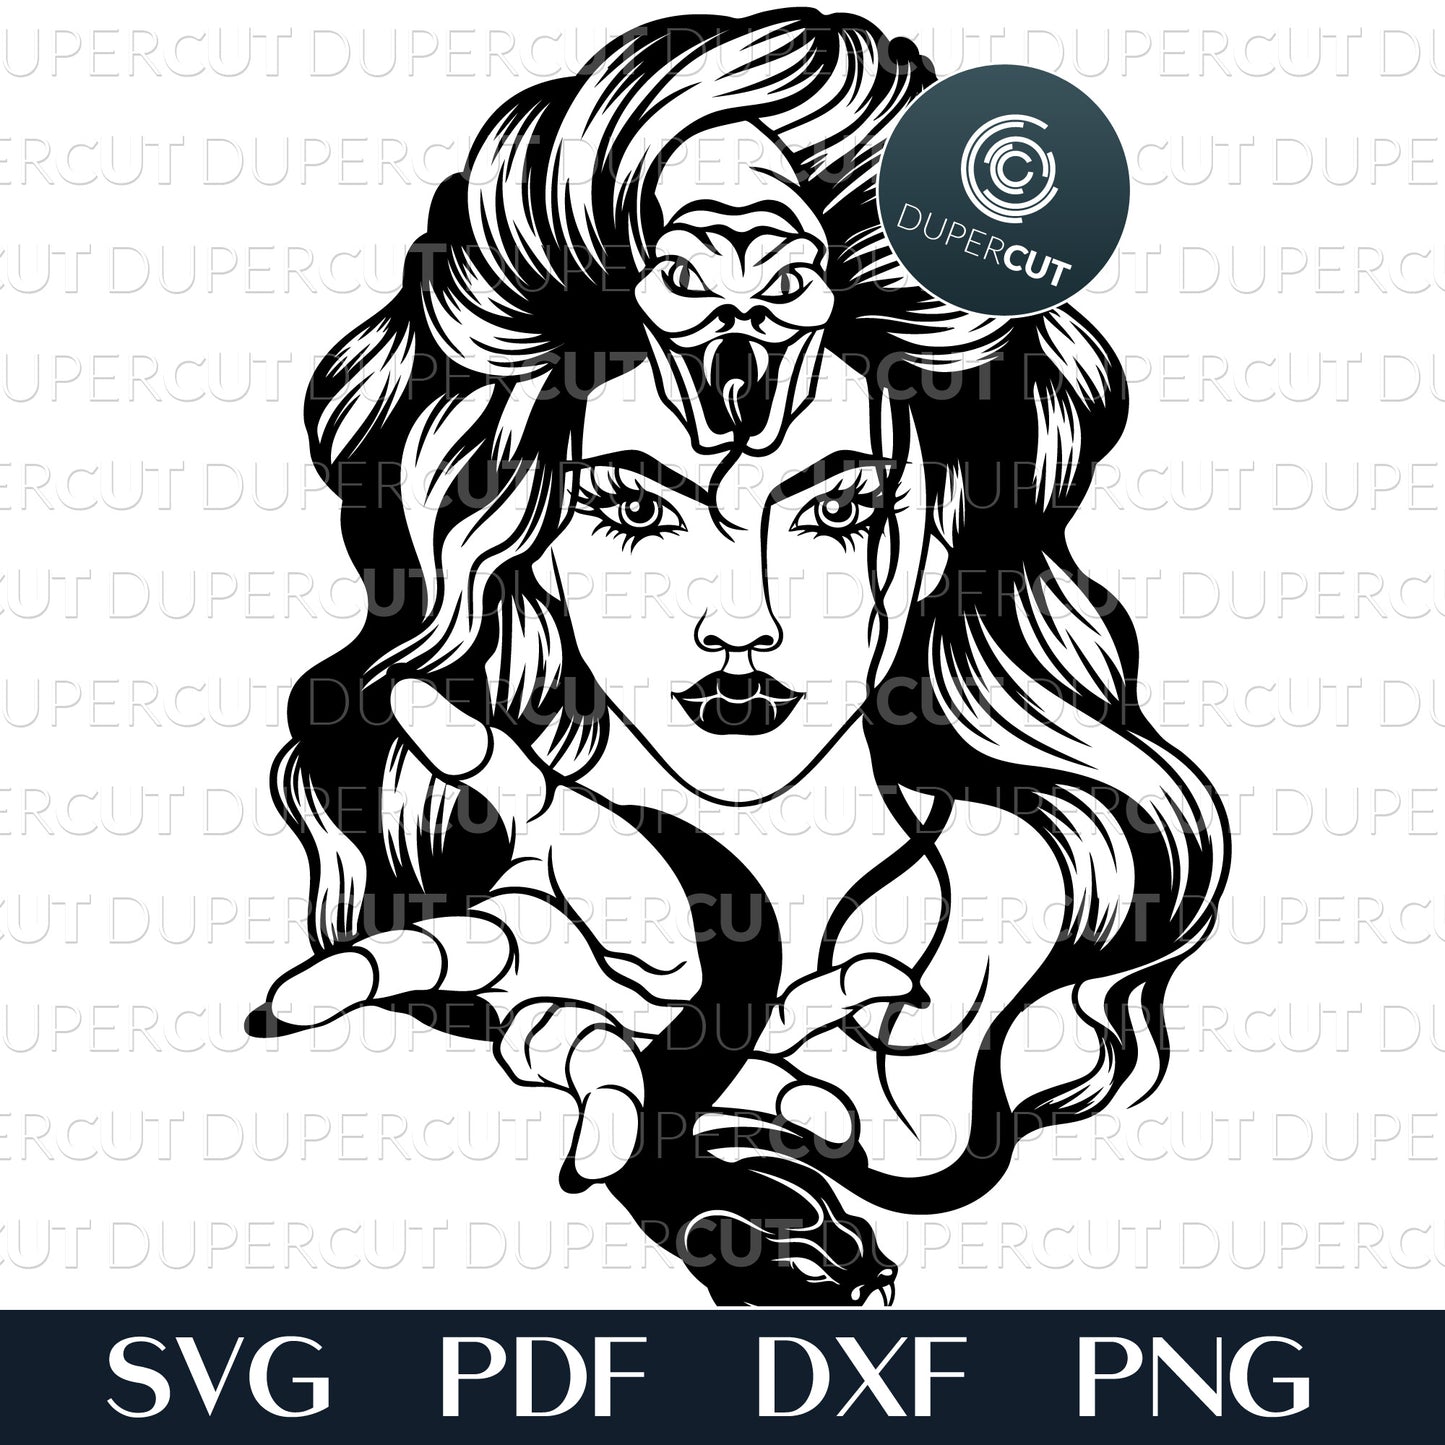 Medusa girl with snake, paper cutting template. SVG PNG DXF files for Cricut, Glowforge, Silhouette Cameo, CNC machines